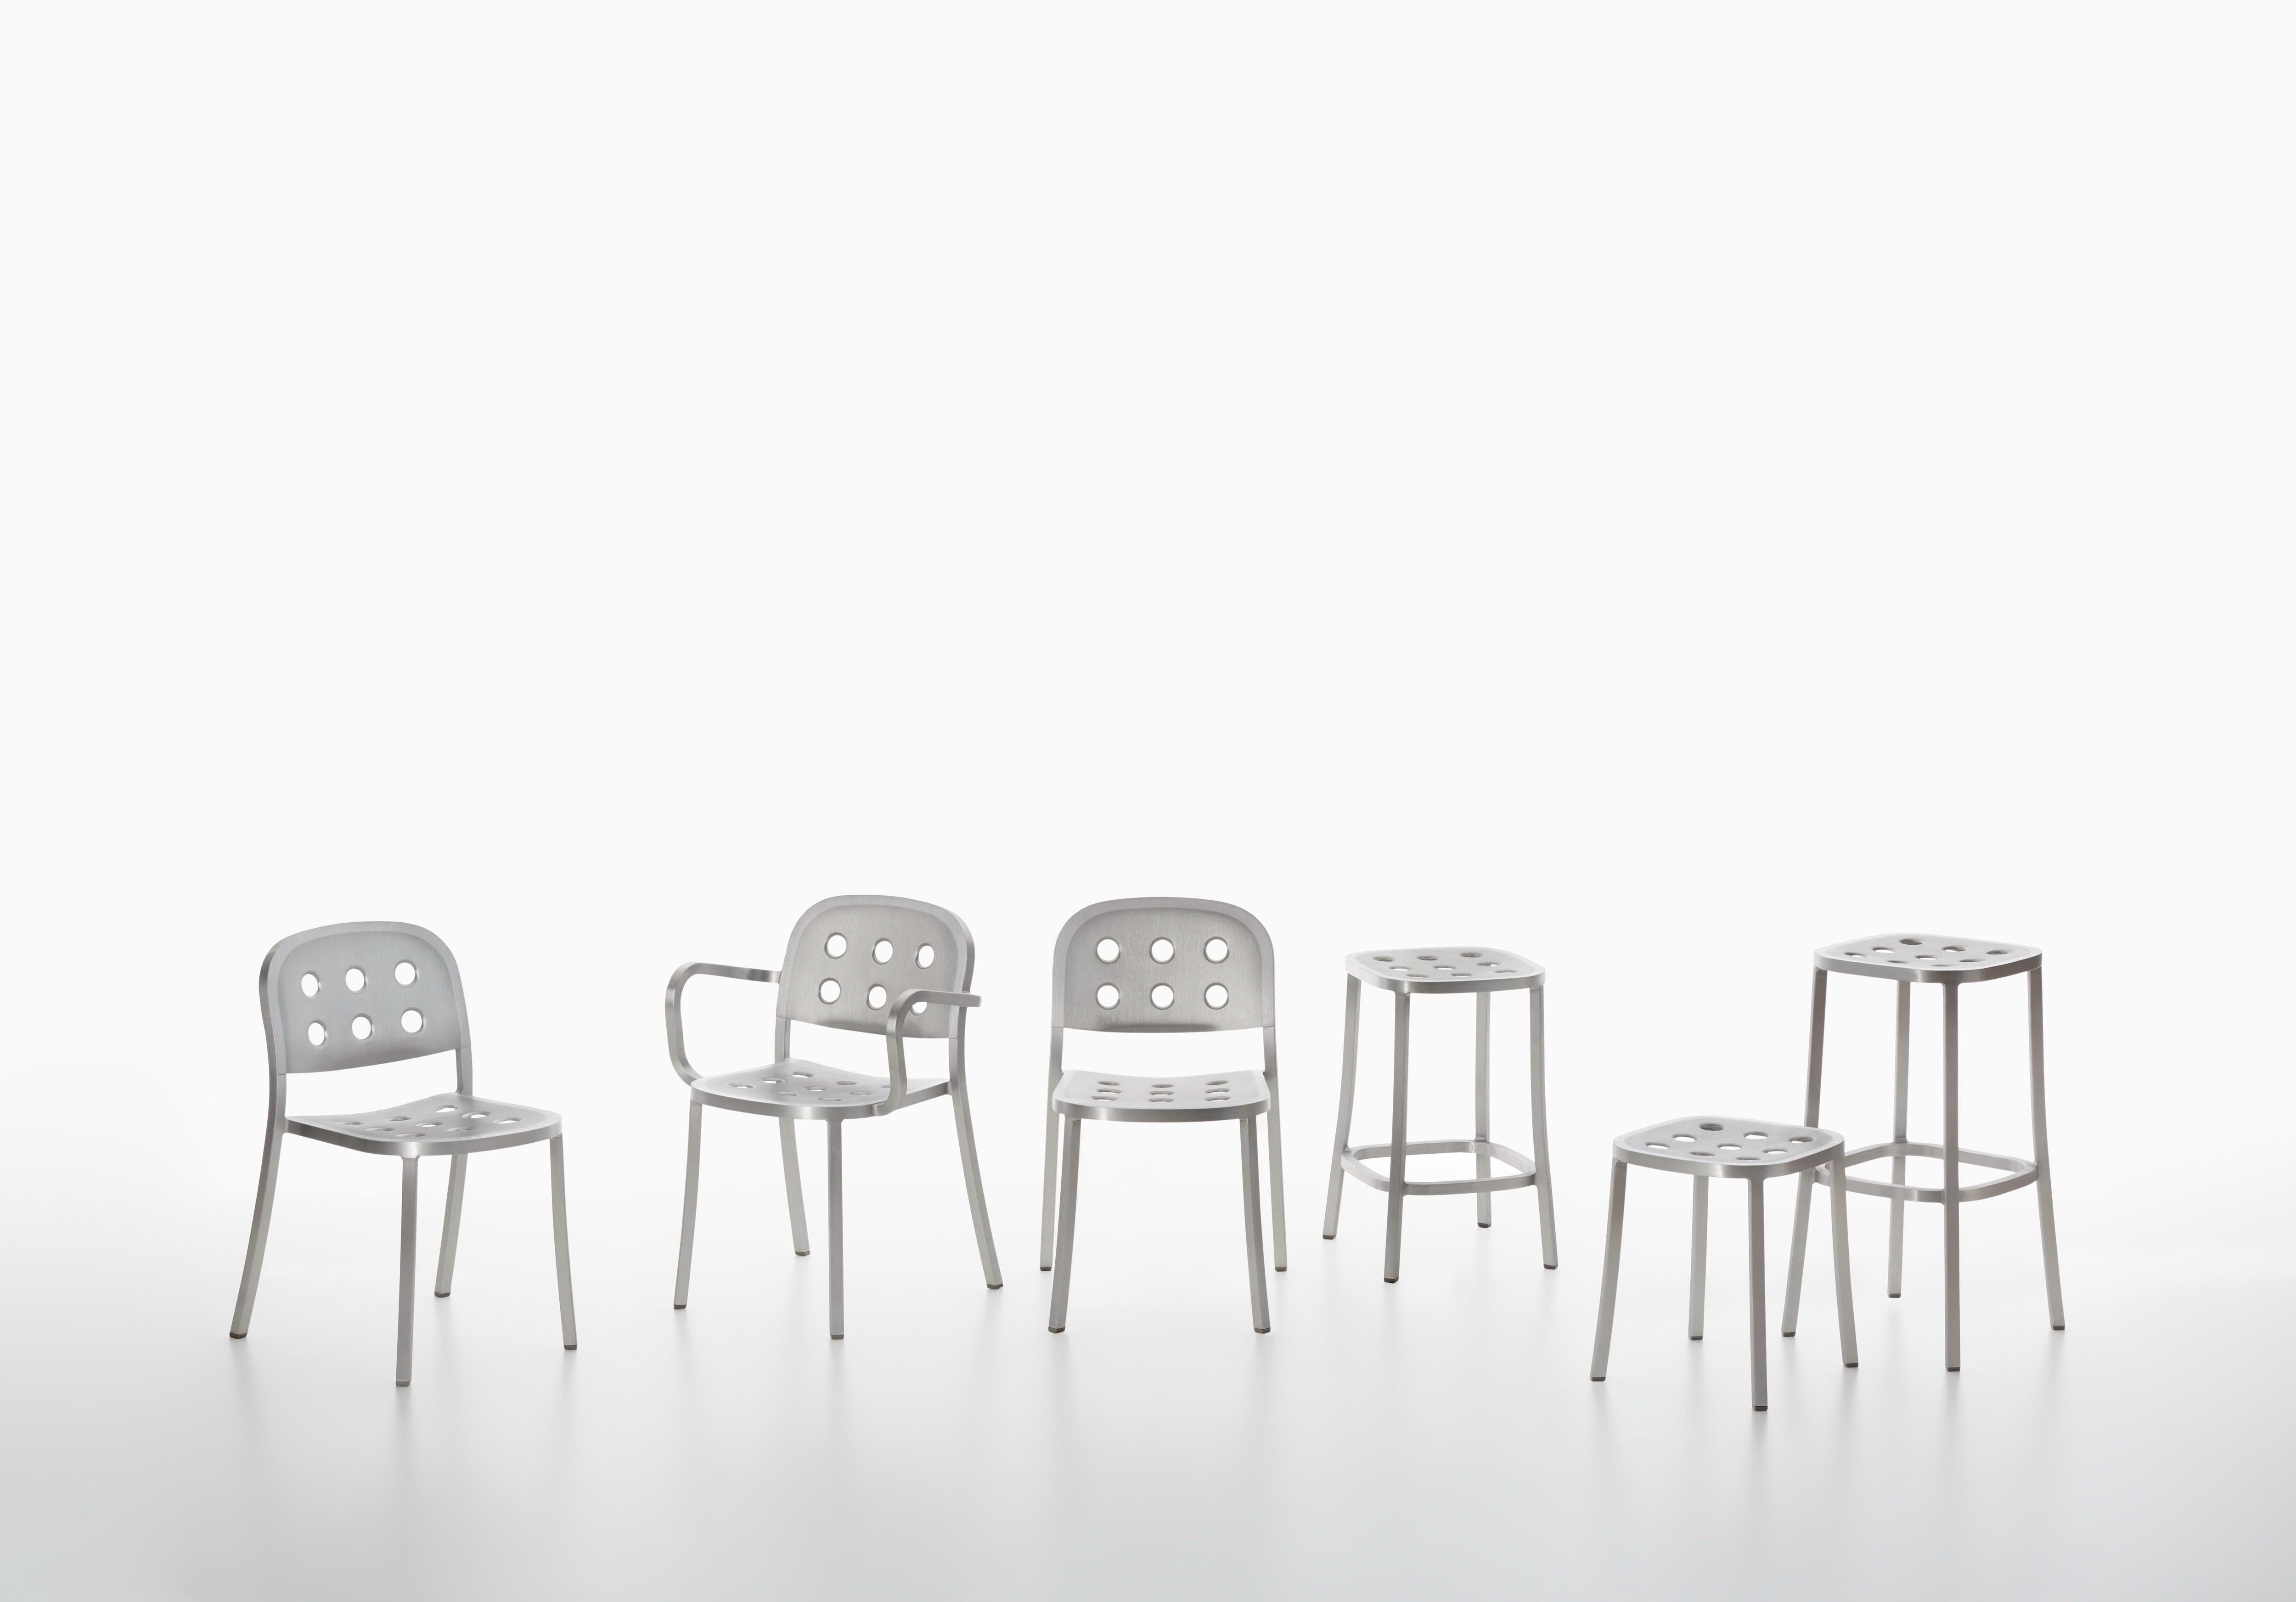 For the 1 Inch collection, Jasper Morrison tapped into Emeco’s heritage in hand crafting recycled aluminum, and leveraged its signature strength, light weight, and sustainability. Emeco and Jasper Morrison together have created a collection that